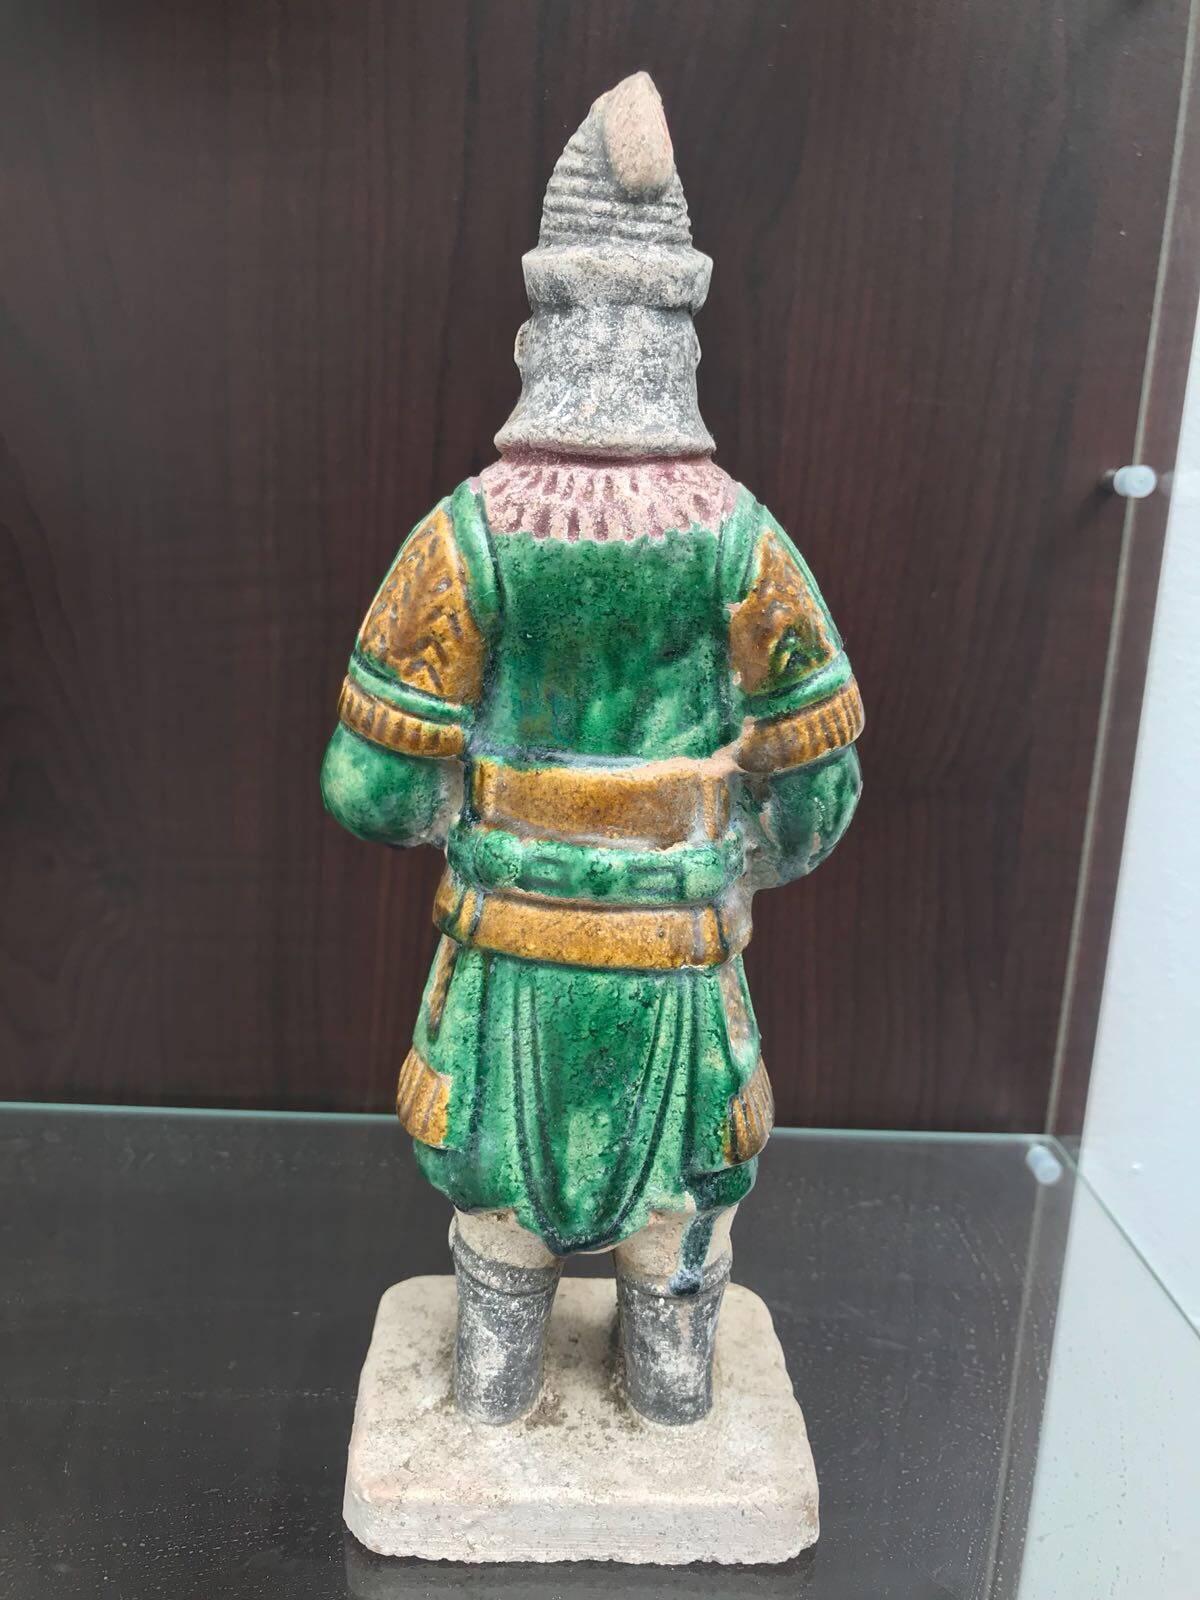 Ming Warrior 24 cms height, wearing Mountain pattern armour and a Manchu helmet with plume, carrying bow. The vast majority of original pigment remaining.
Condition: Very good 
TL tested